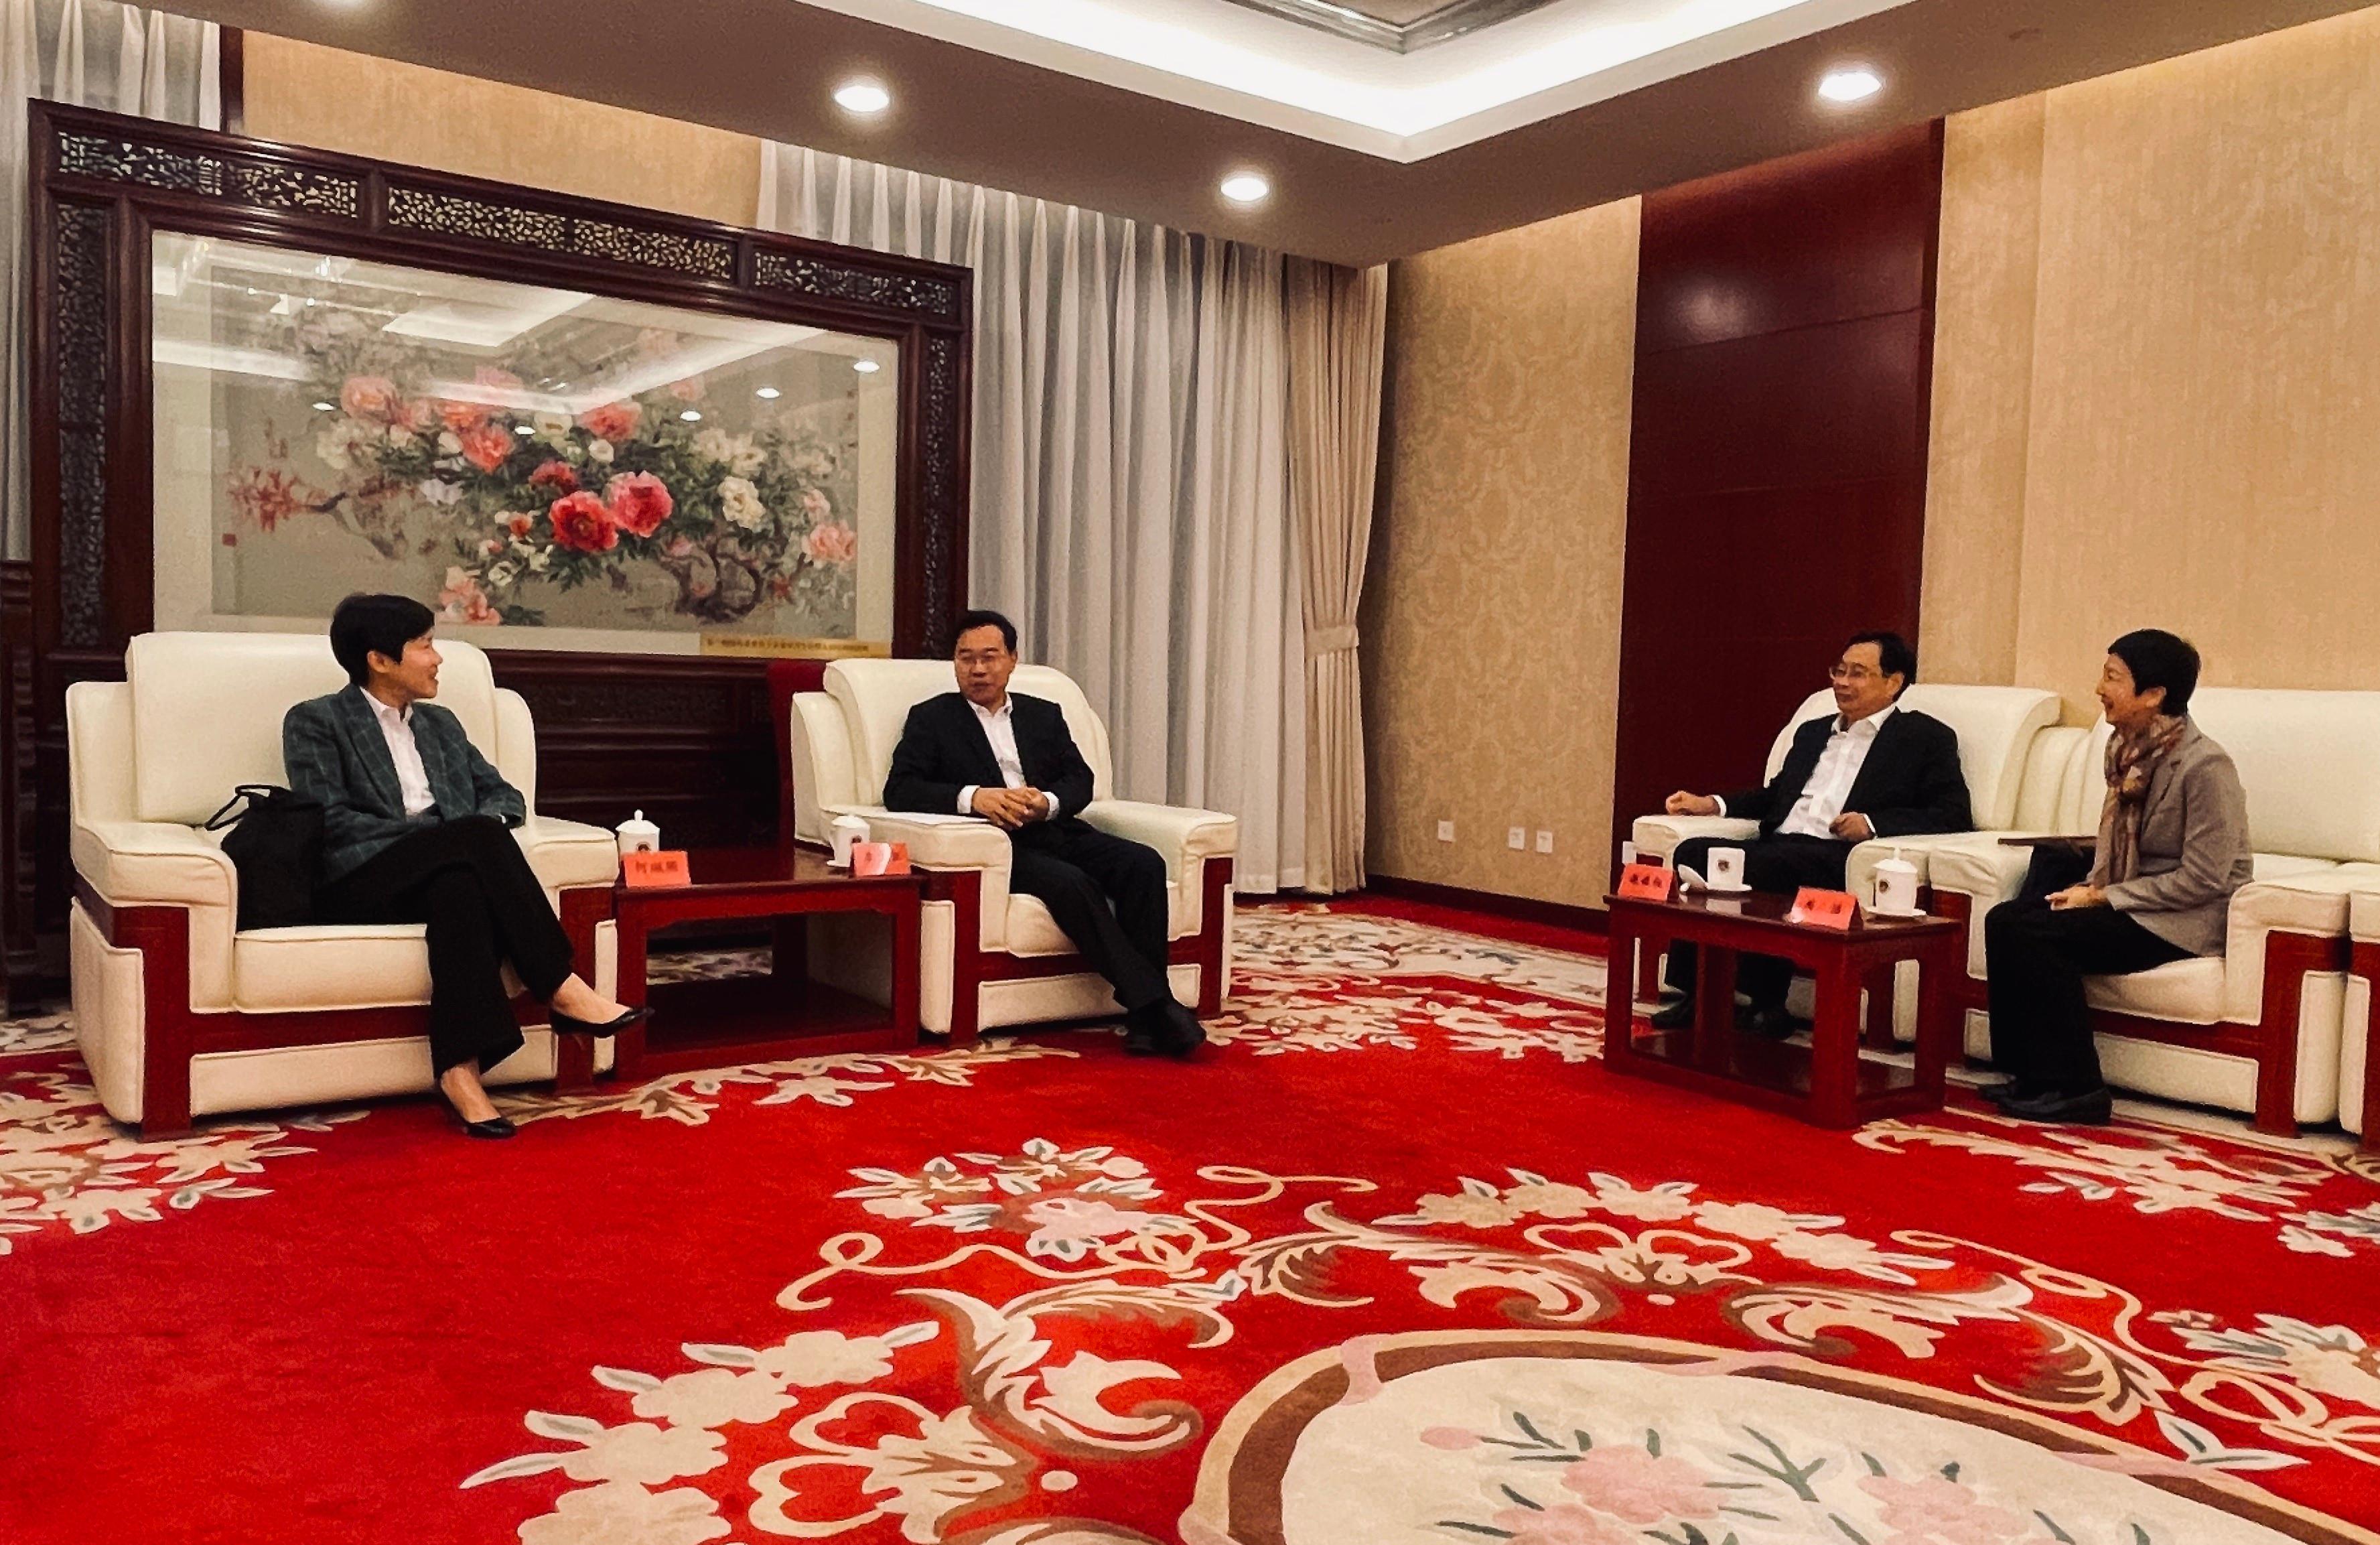 The Commissioner of Customs and Excise, Ms Louise Ho, today (October 13) attended the opening ceremony of the National Studies Course for Middle and Senior Managers of the Customs and Excise Department at the National Academy of Governance in Beijing. Photo shows Ms Ho (first left) exchanging views with Vice President of the National Academy of Governance Mr Li Wentang (second left). 